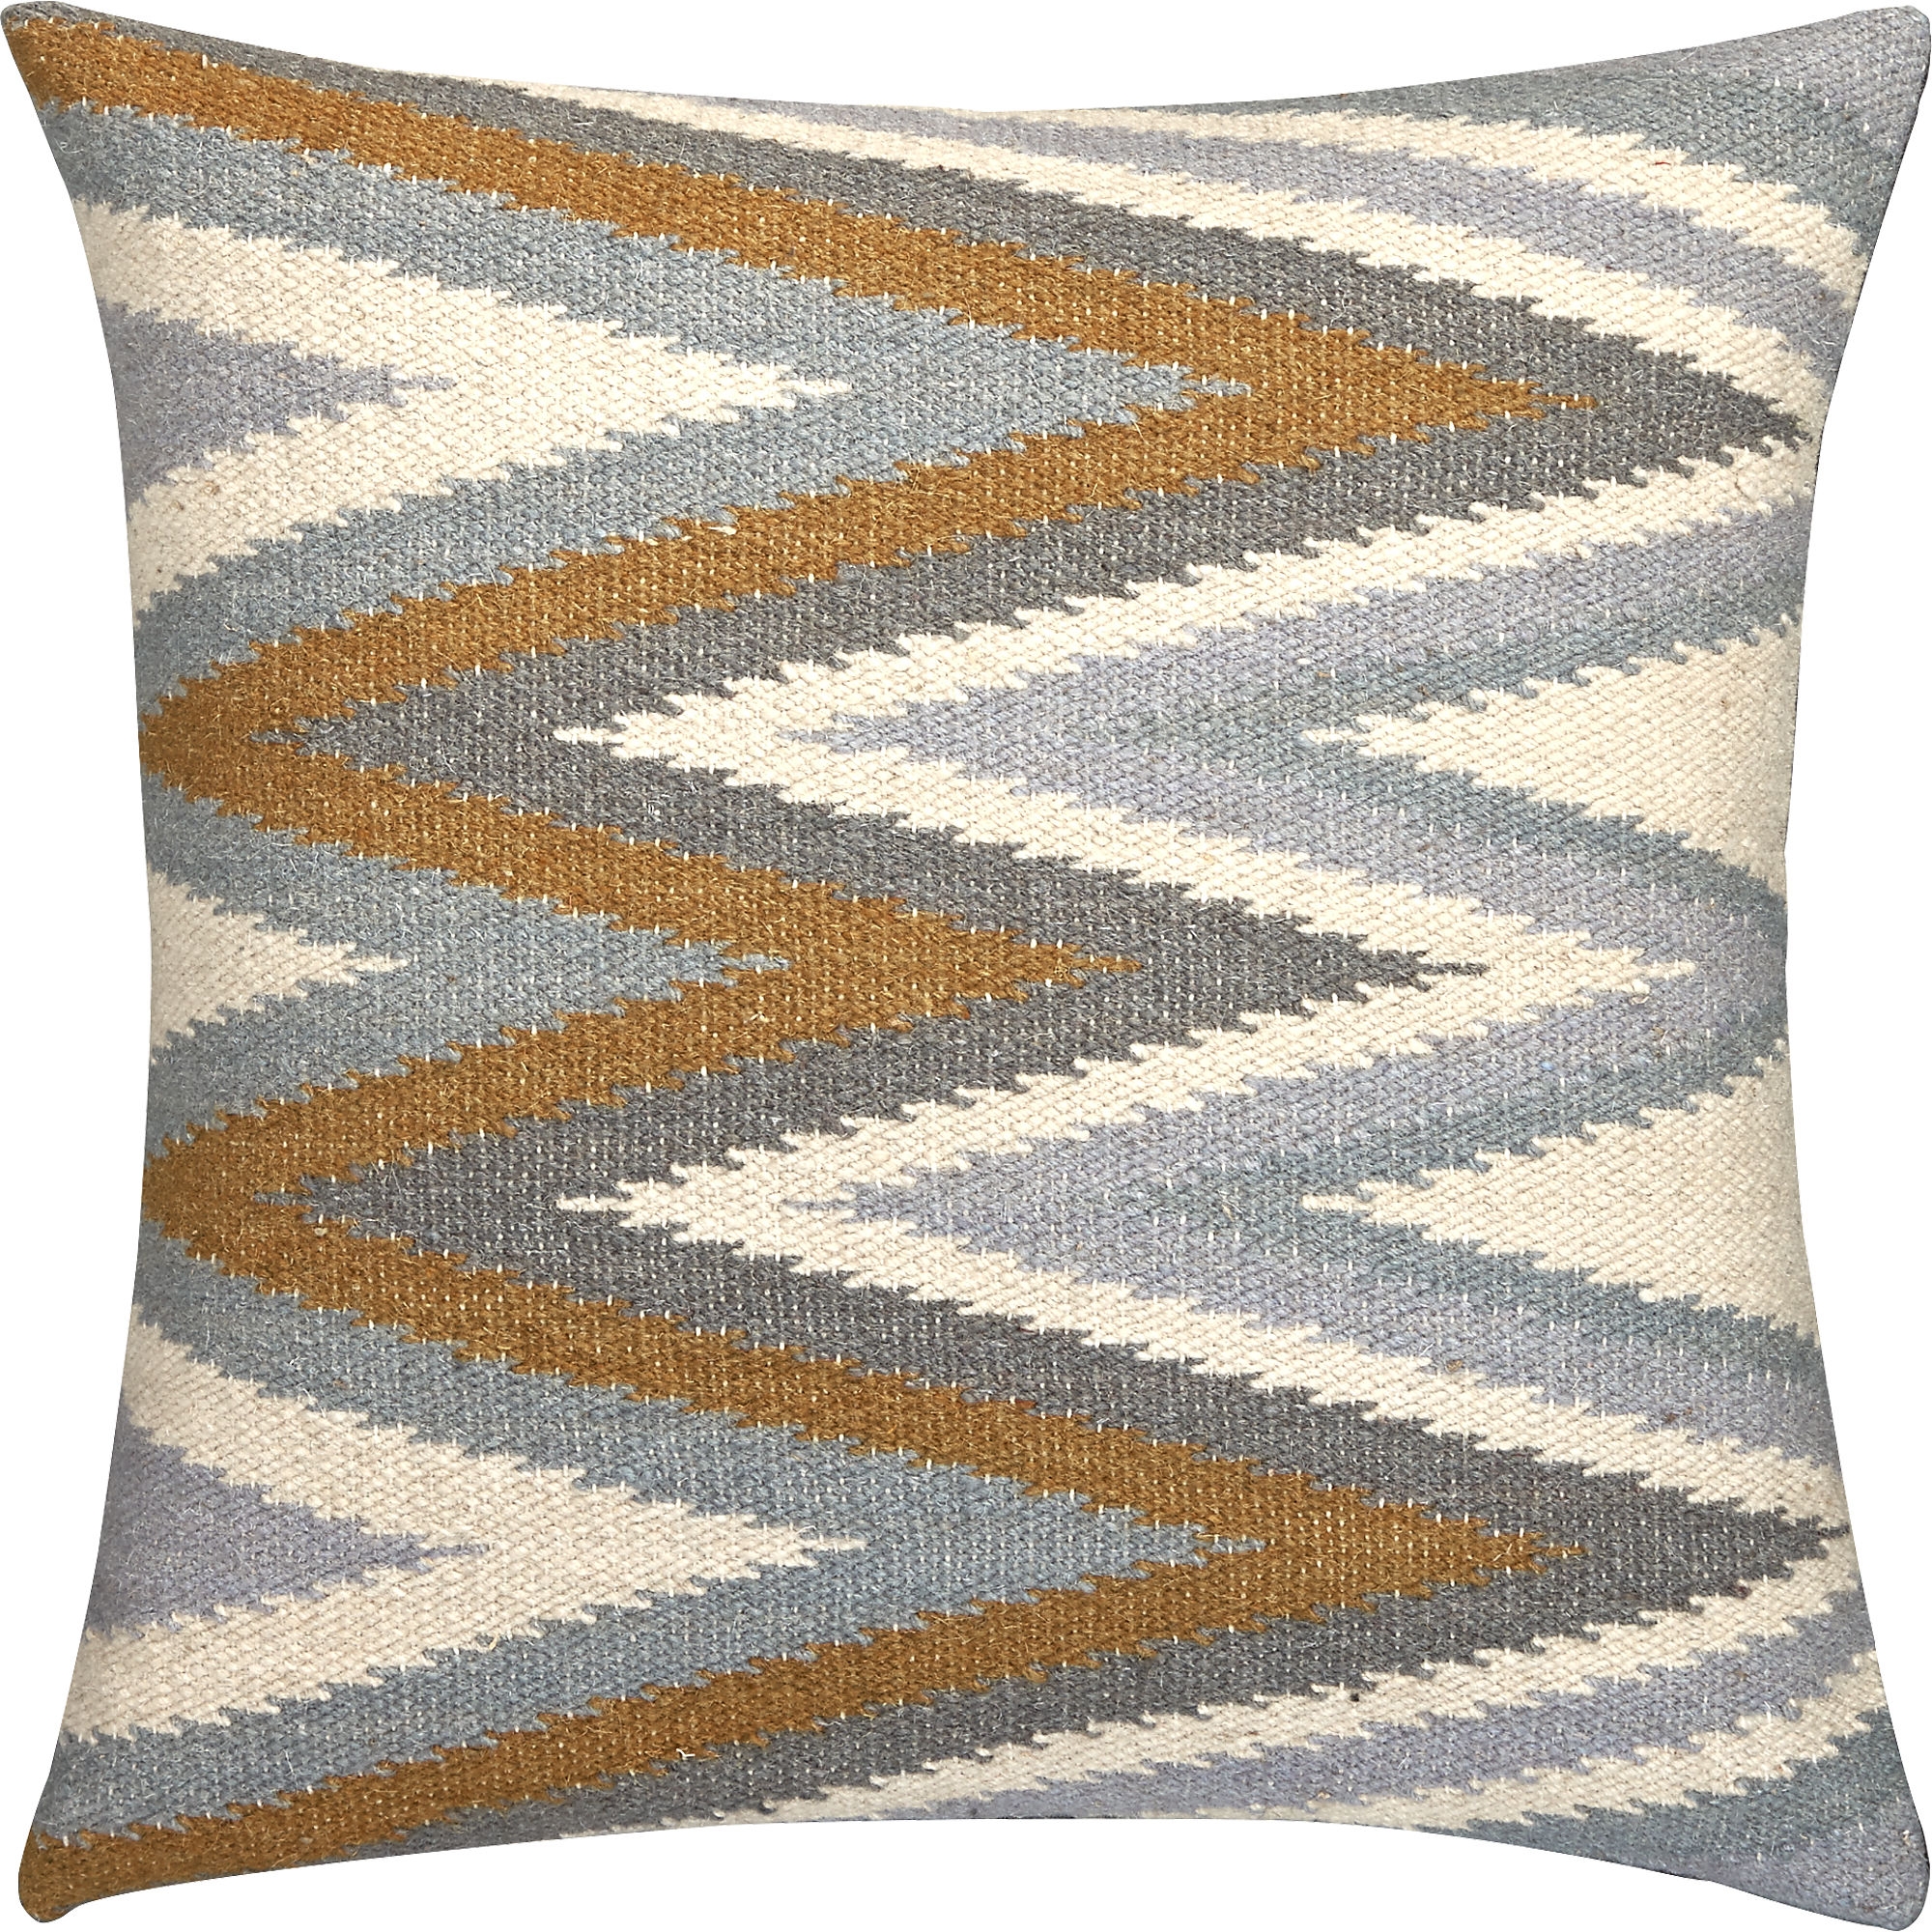 Groove pillow - Image 0